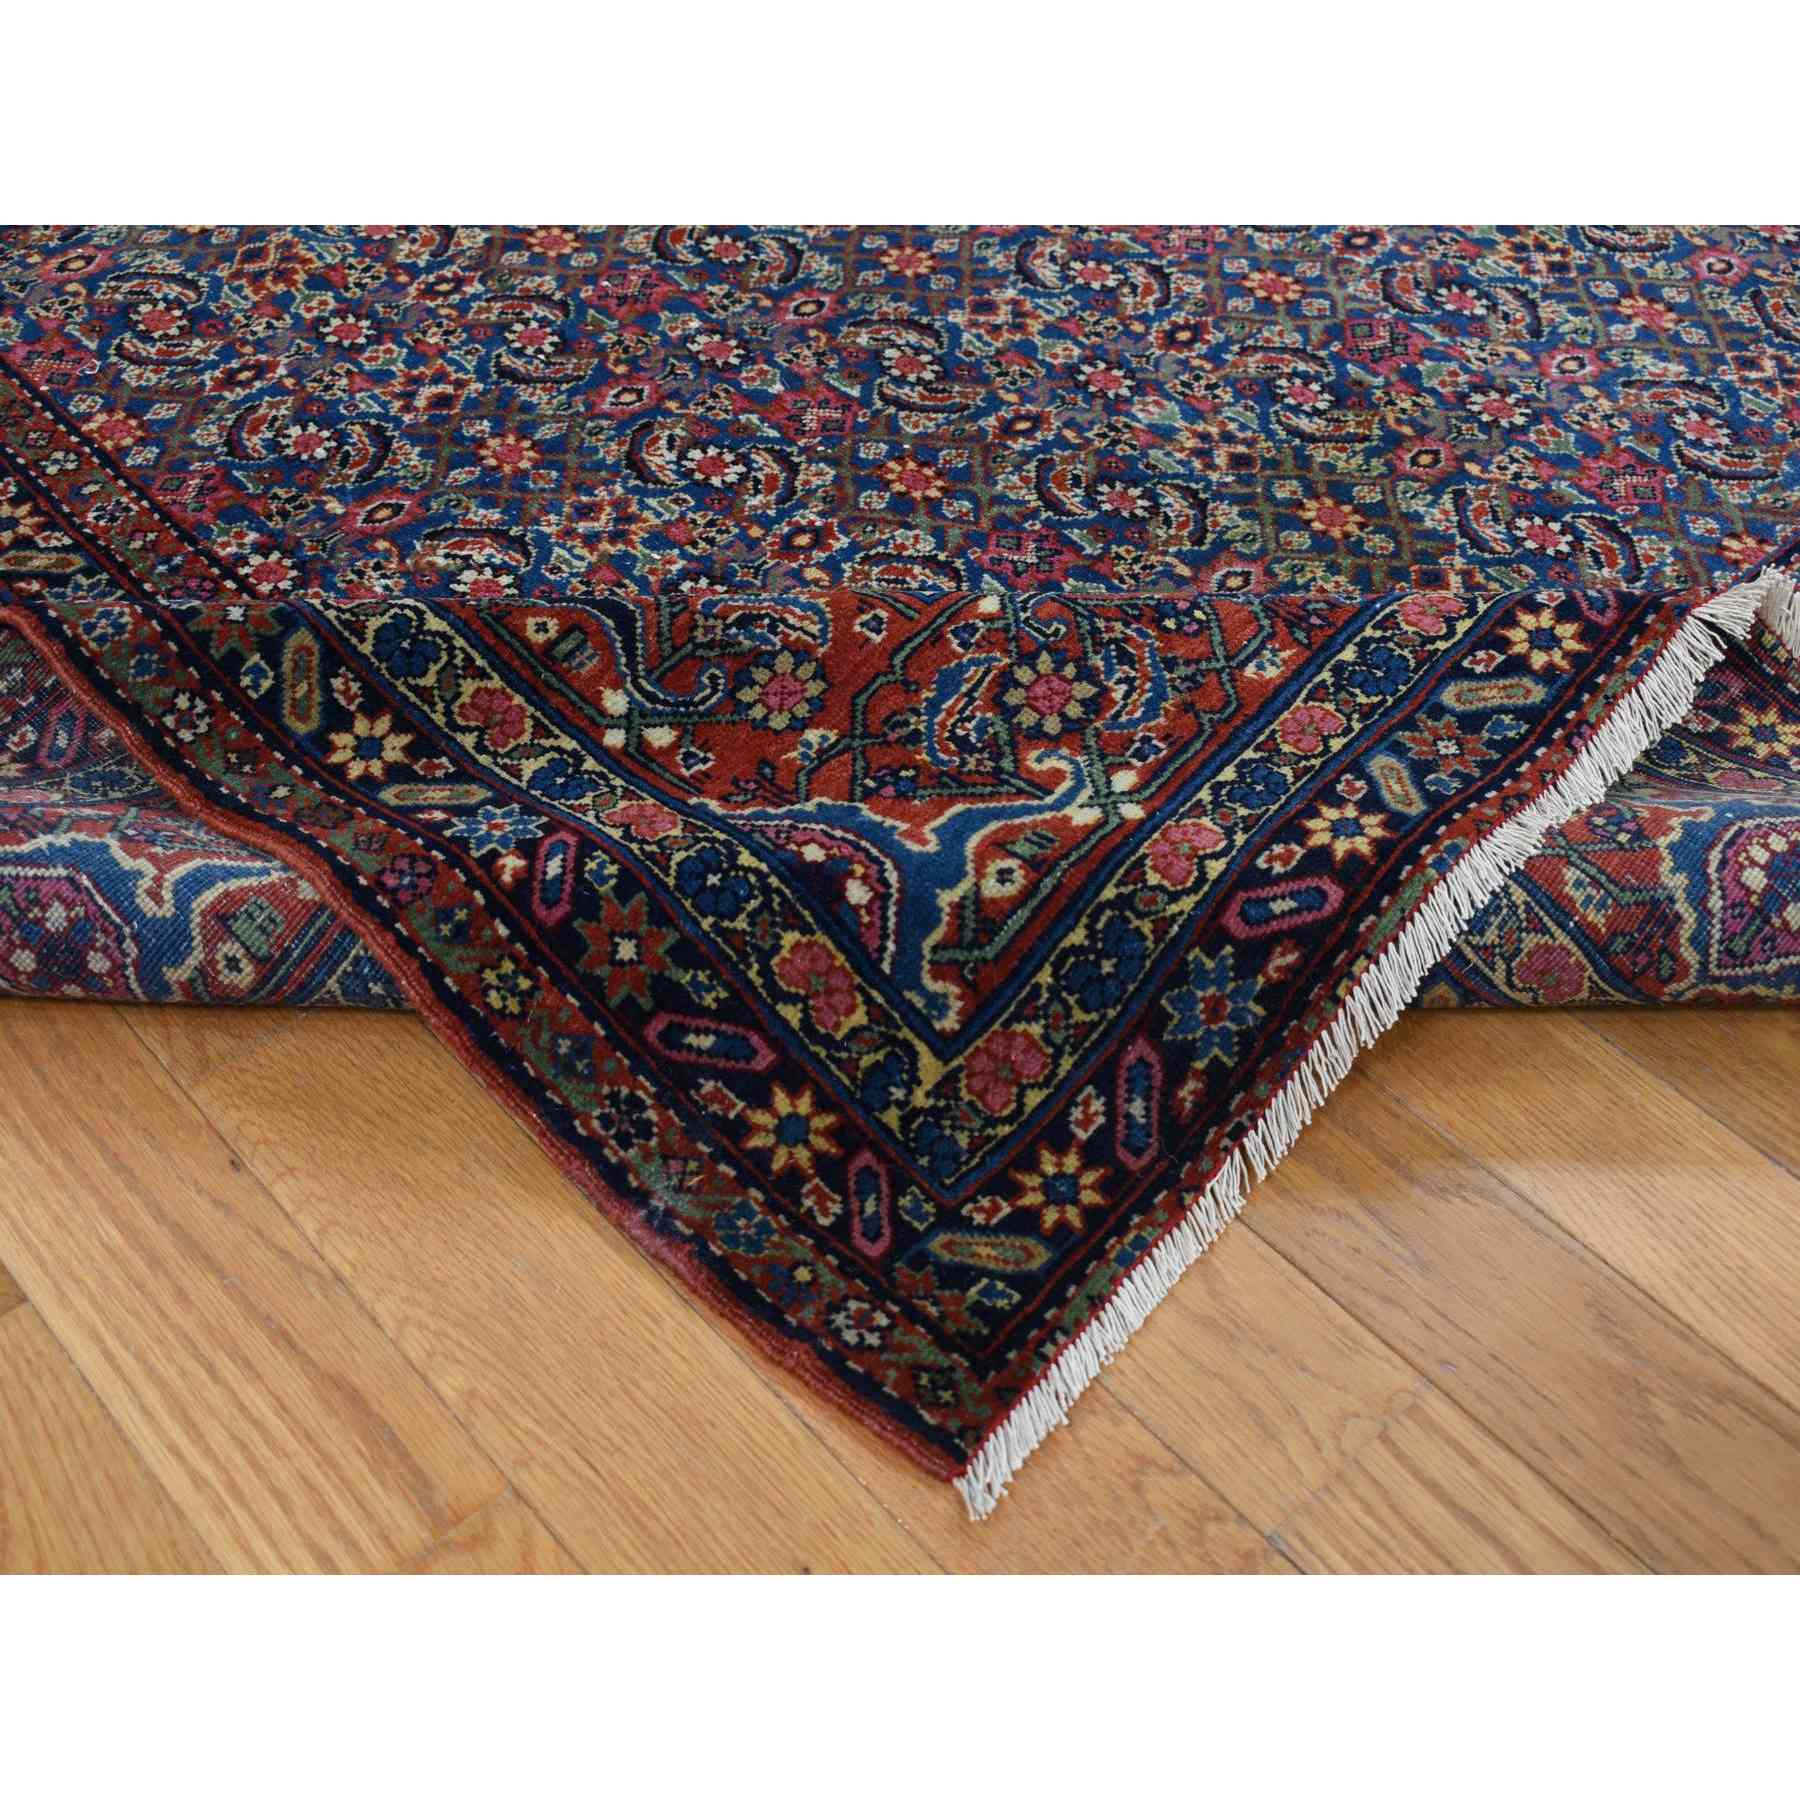 Antique-Hand-Knotted-Rug-437665